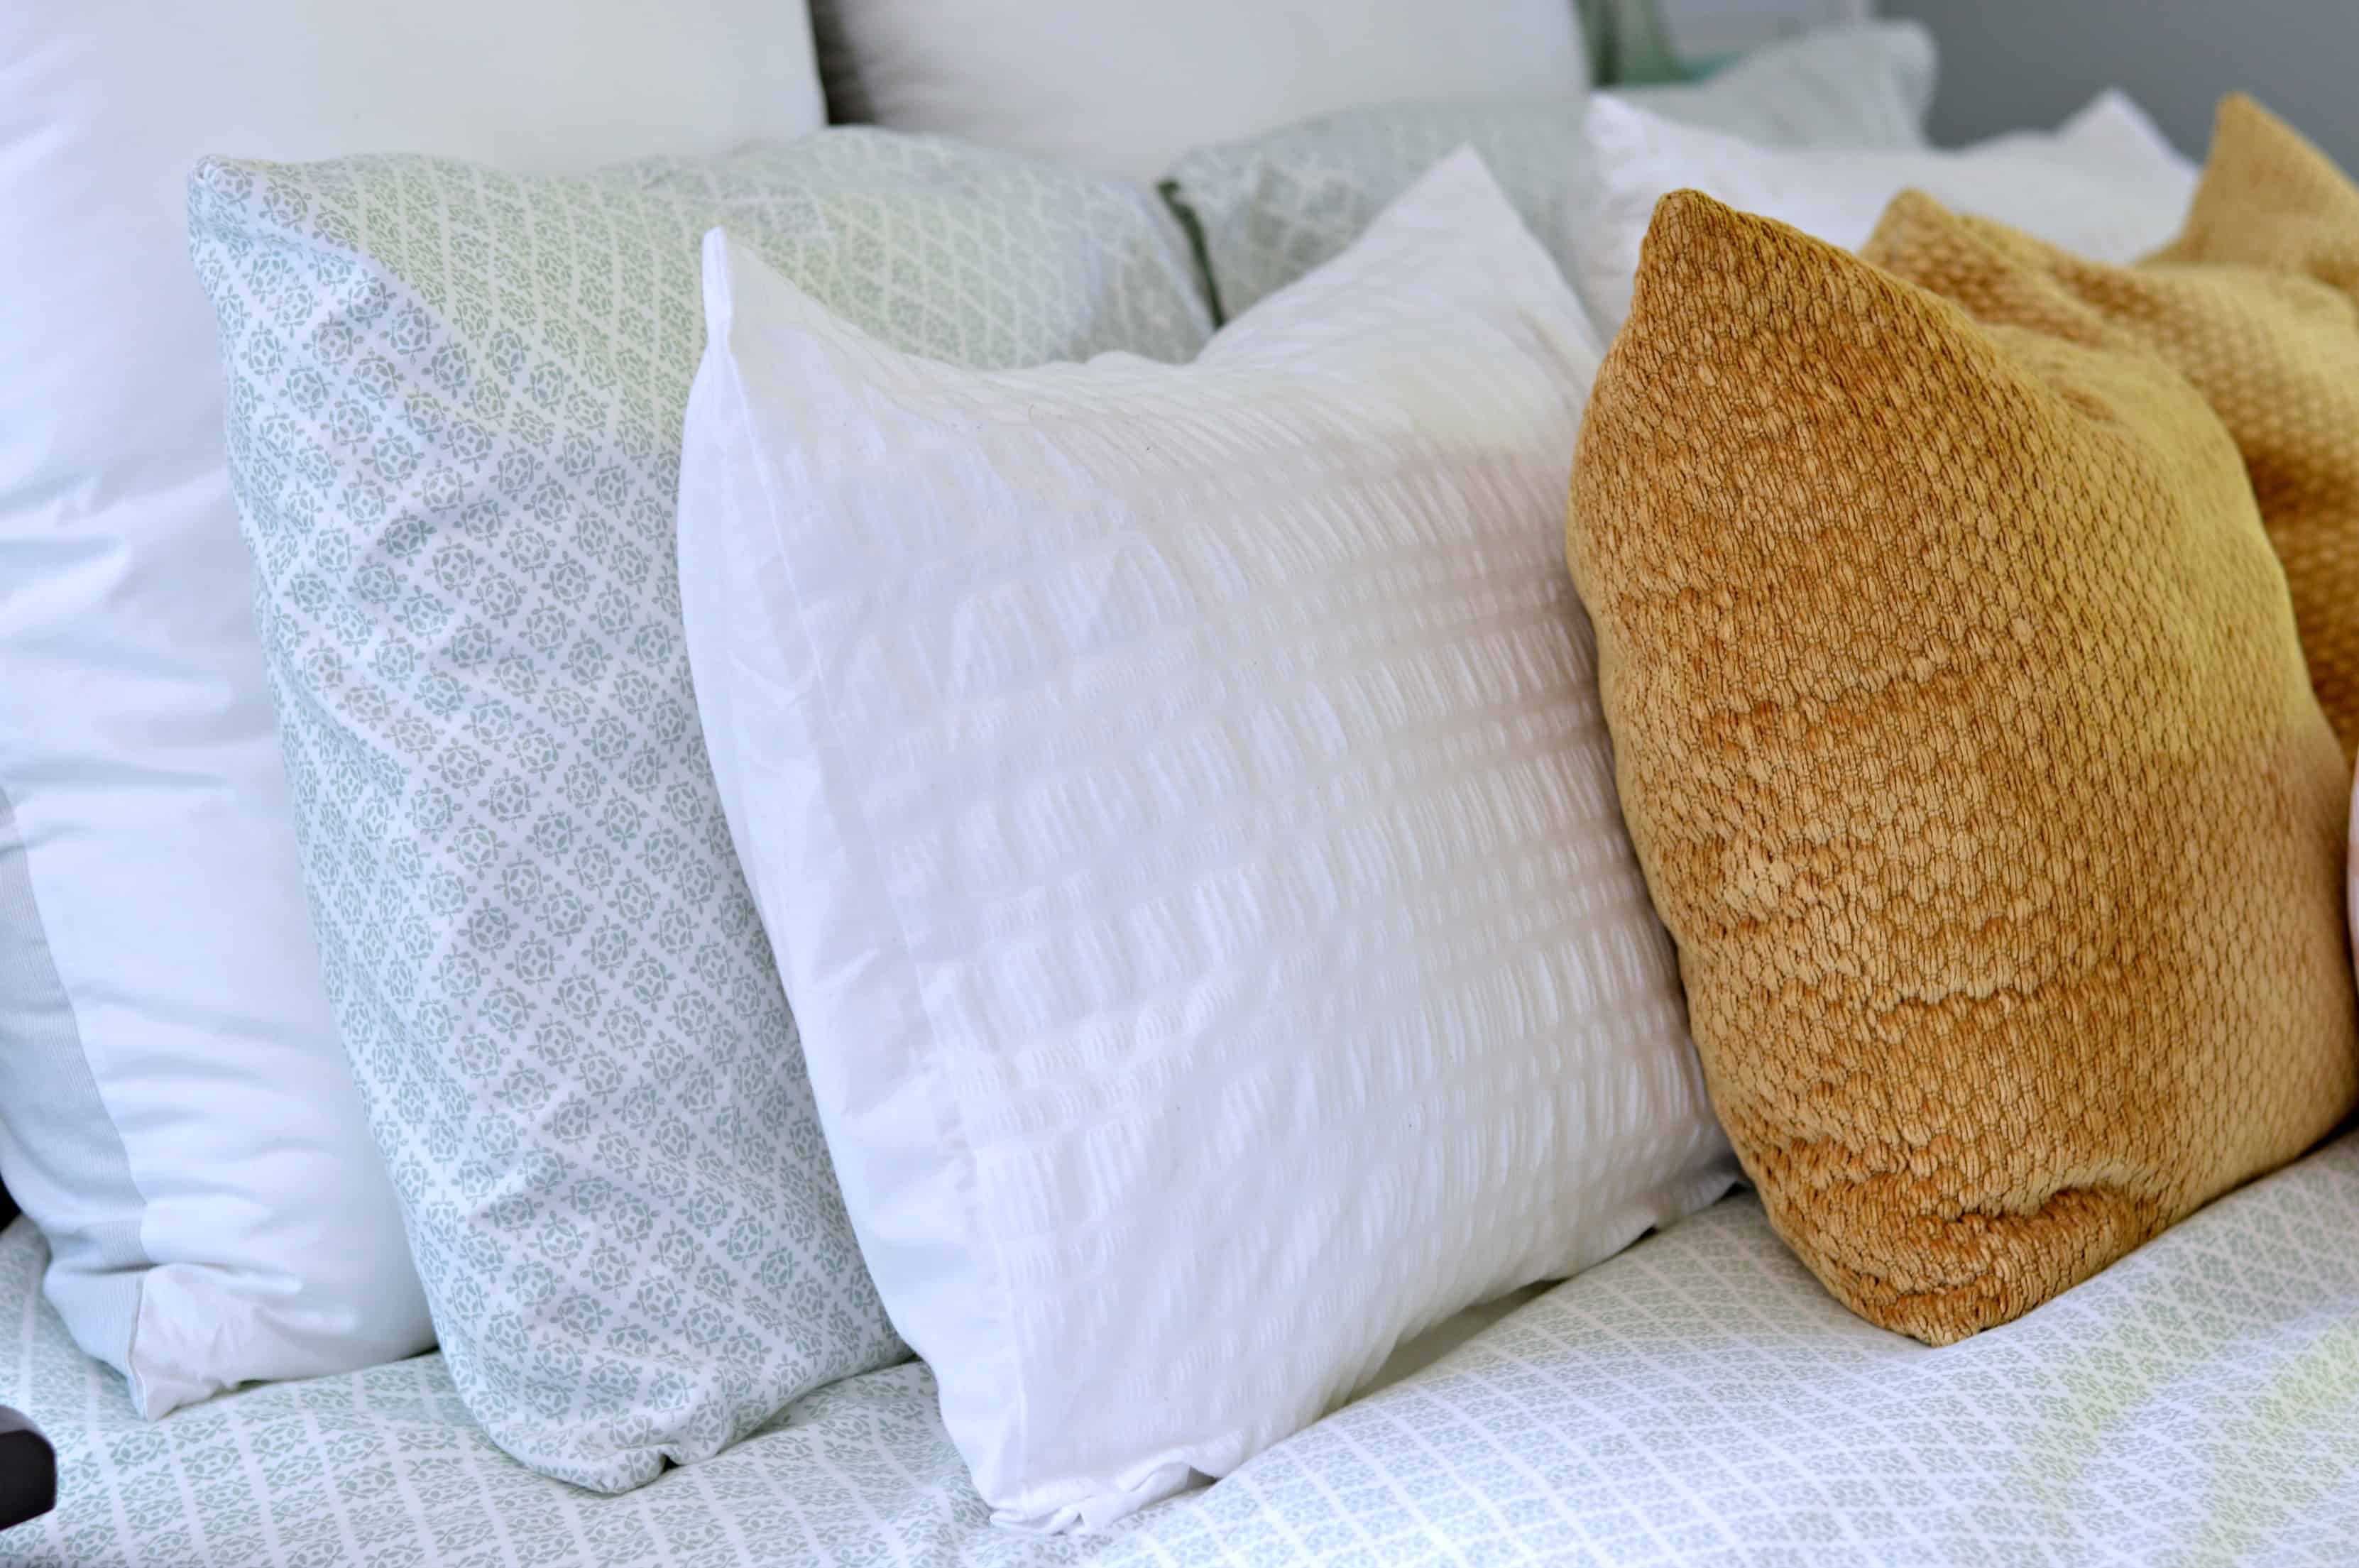 Adding texture to a bed is easy with pillows